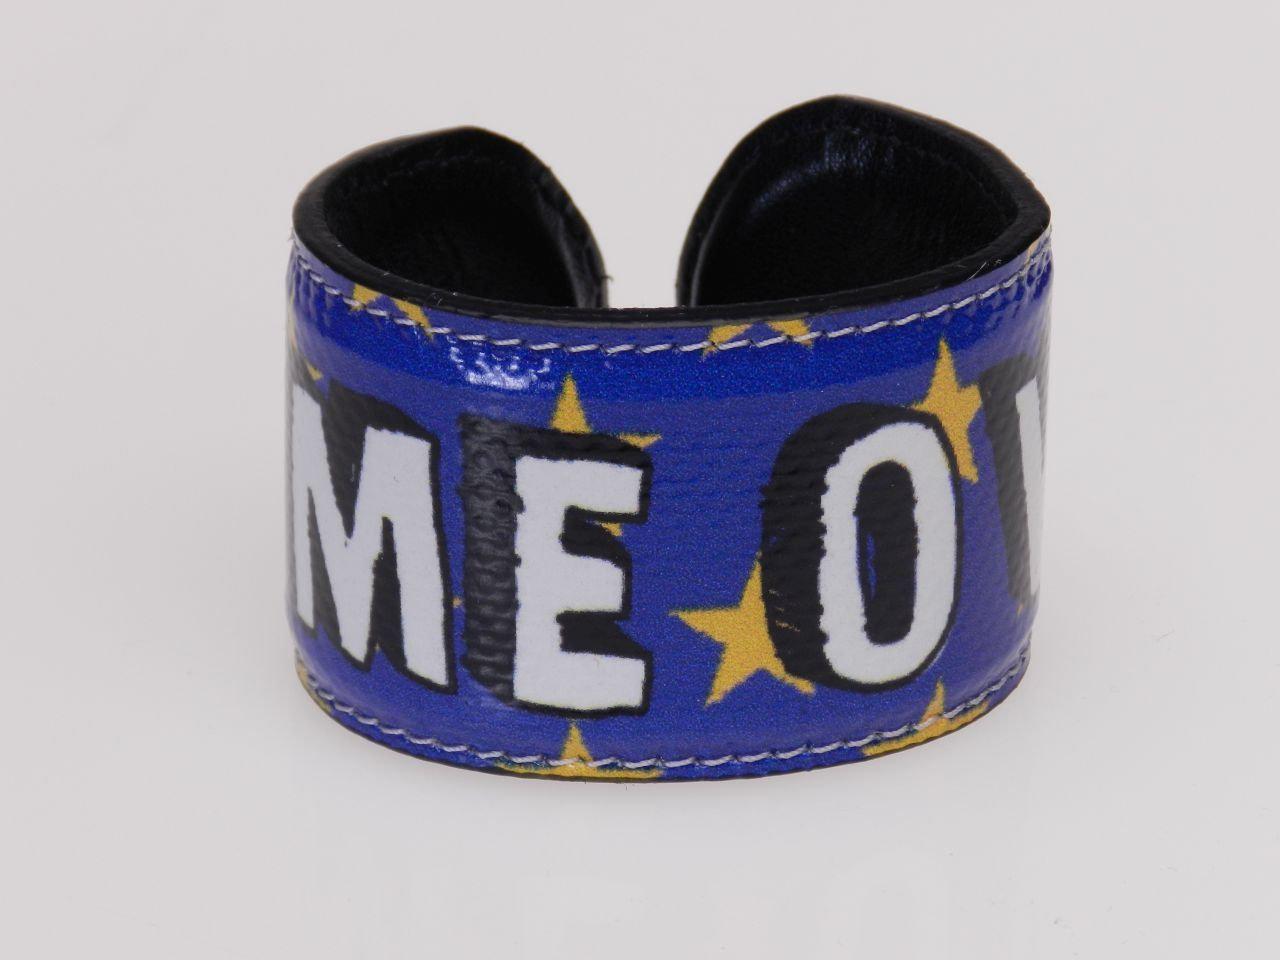 WOMAN BRACELET BLUE WITH YELLOW STARS. - Limited Edition Paul Meccanico